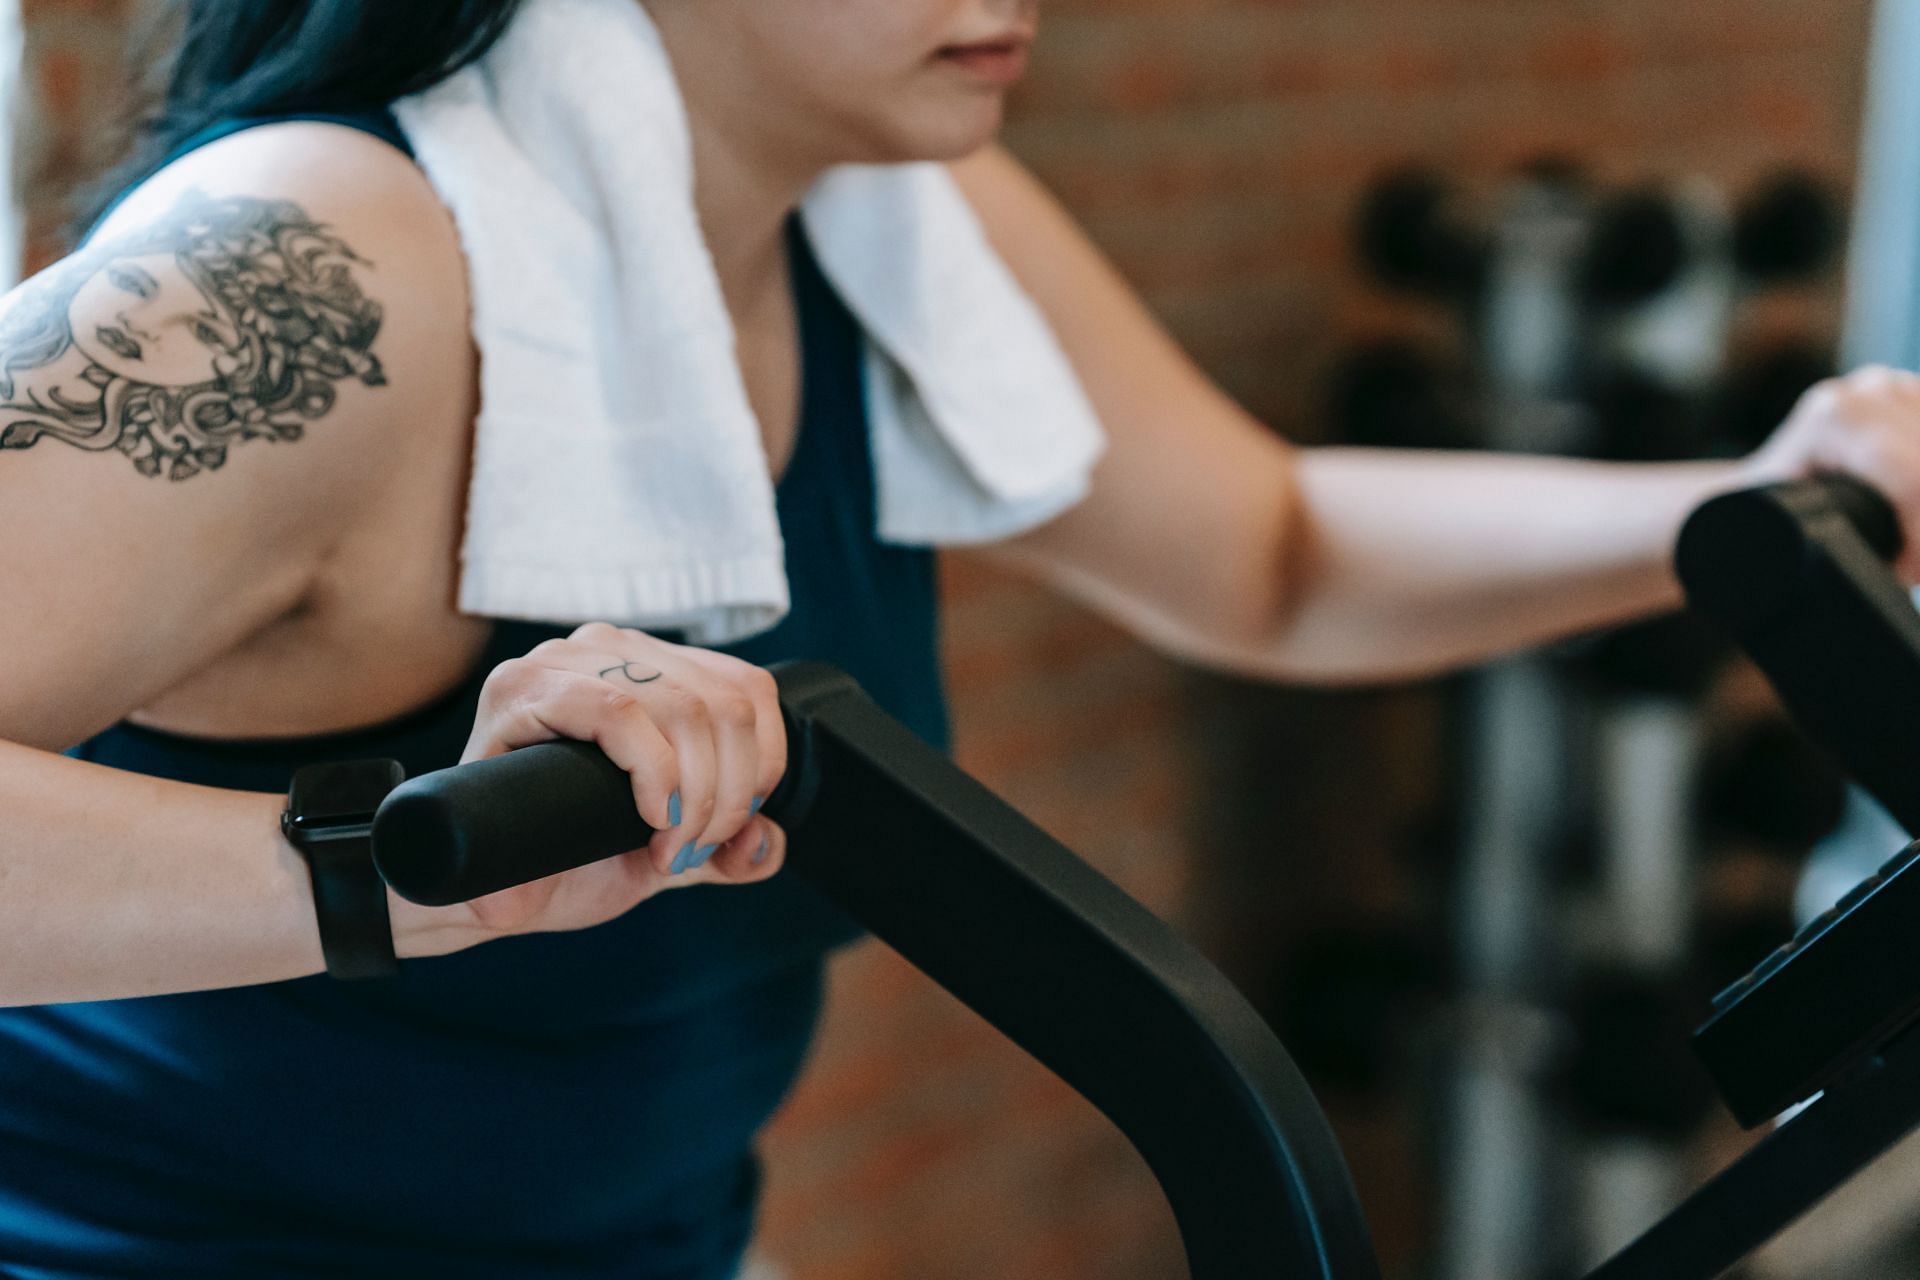 Stationary bikes are a great option for cycling at home. (Image via Pexels/ Andres Ayrton)